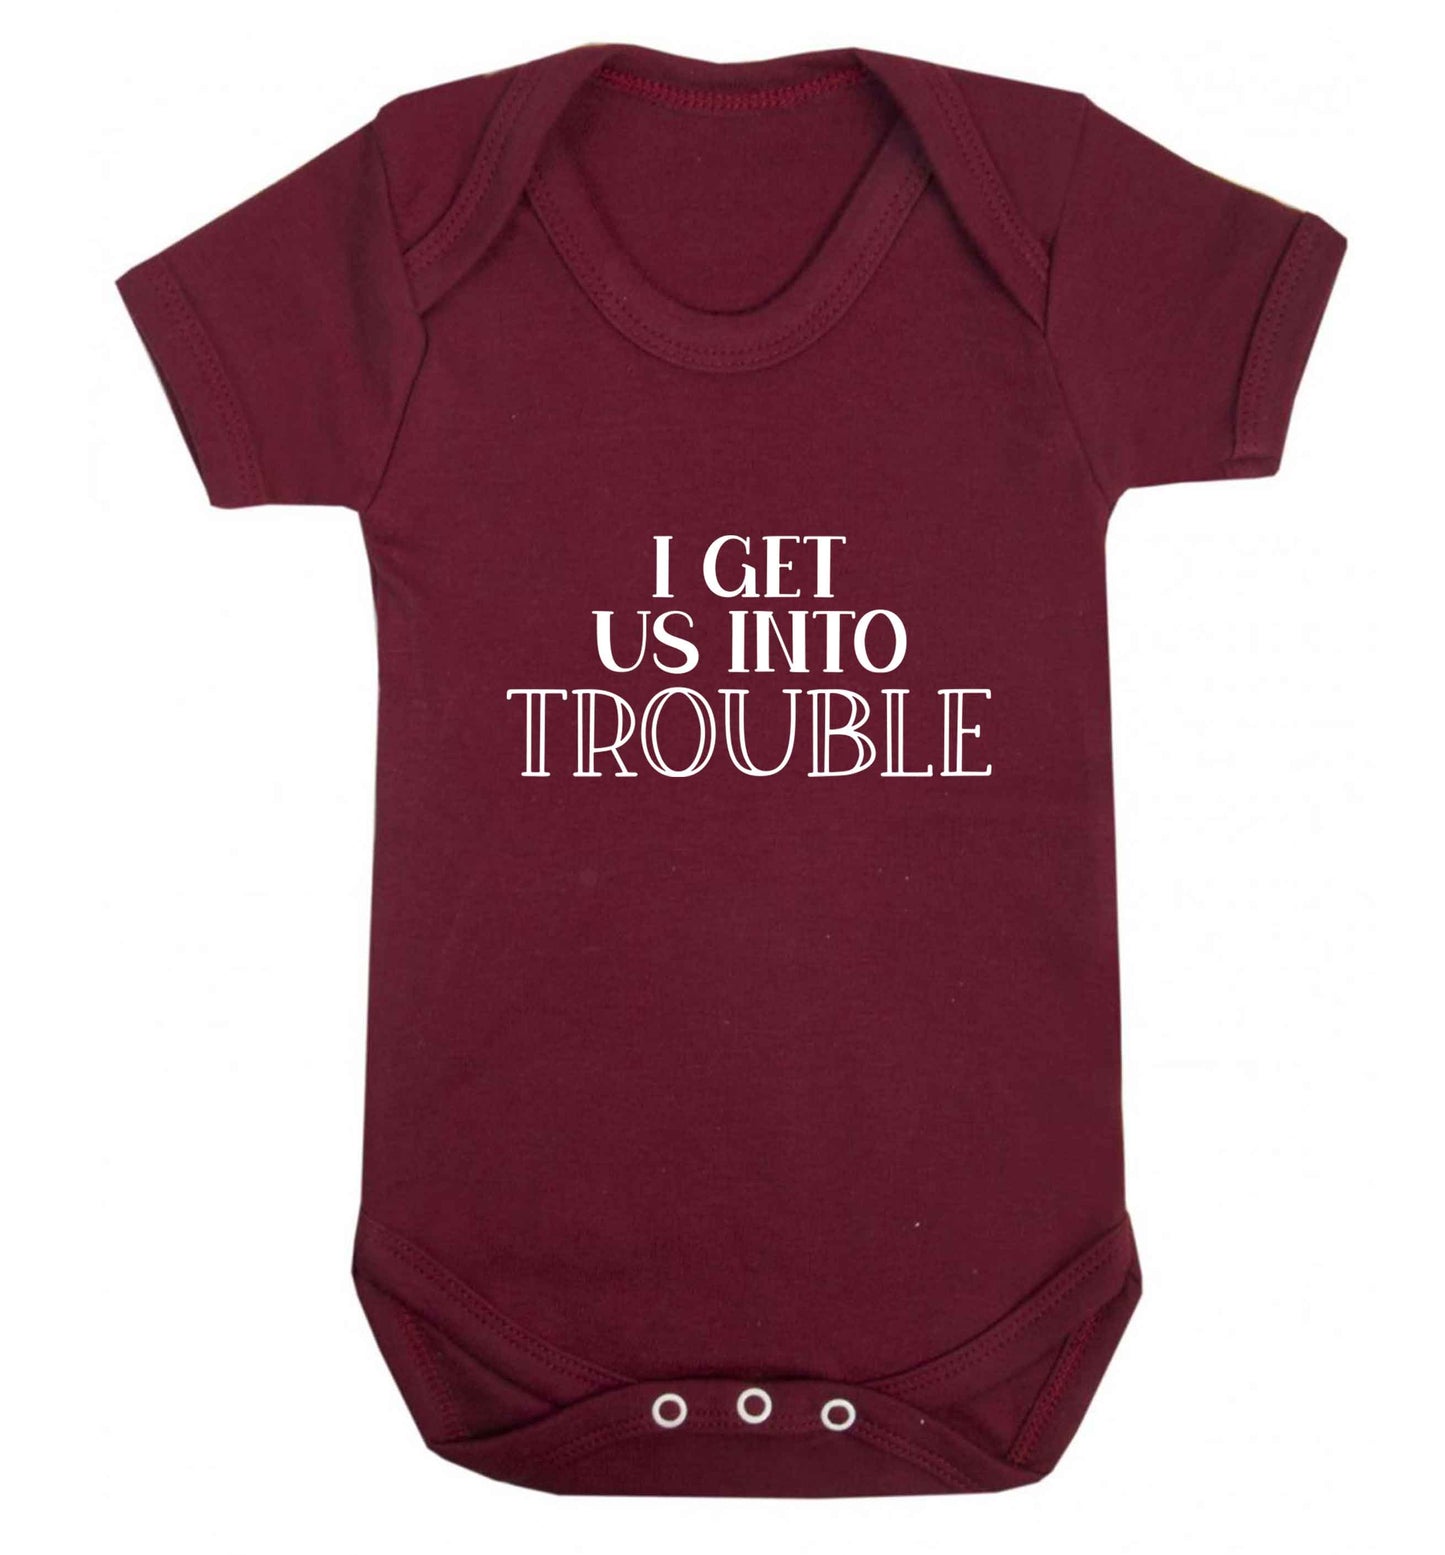 I get us into trouble baby vest maroon 18-24 months